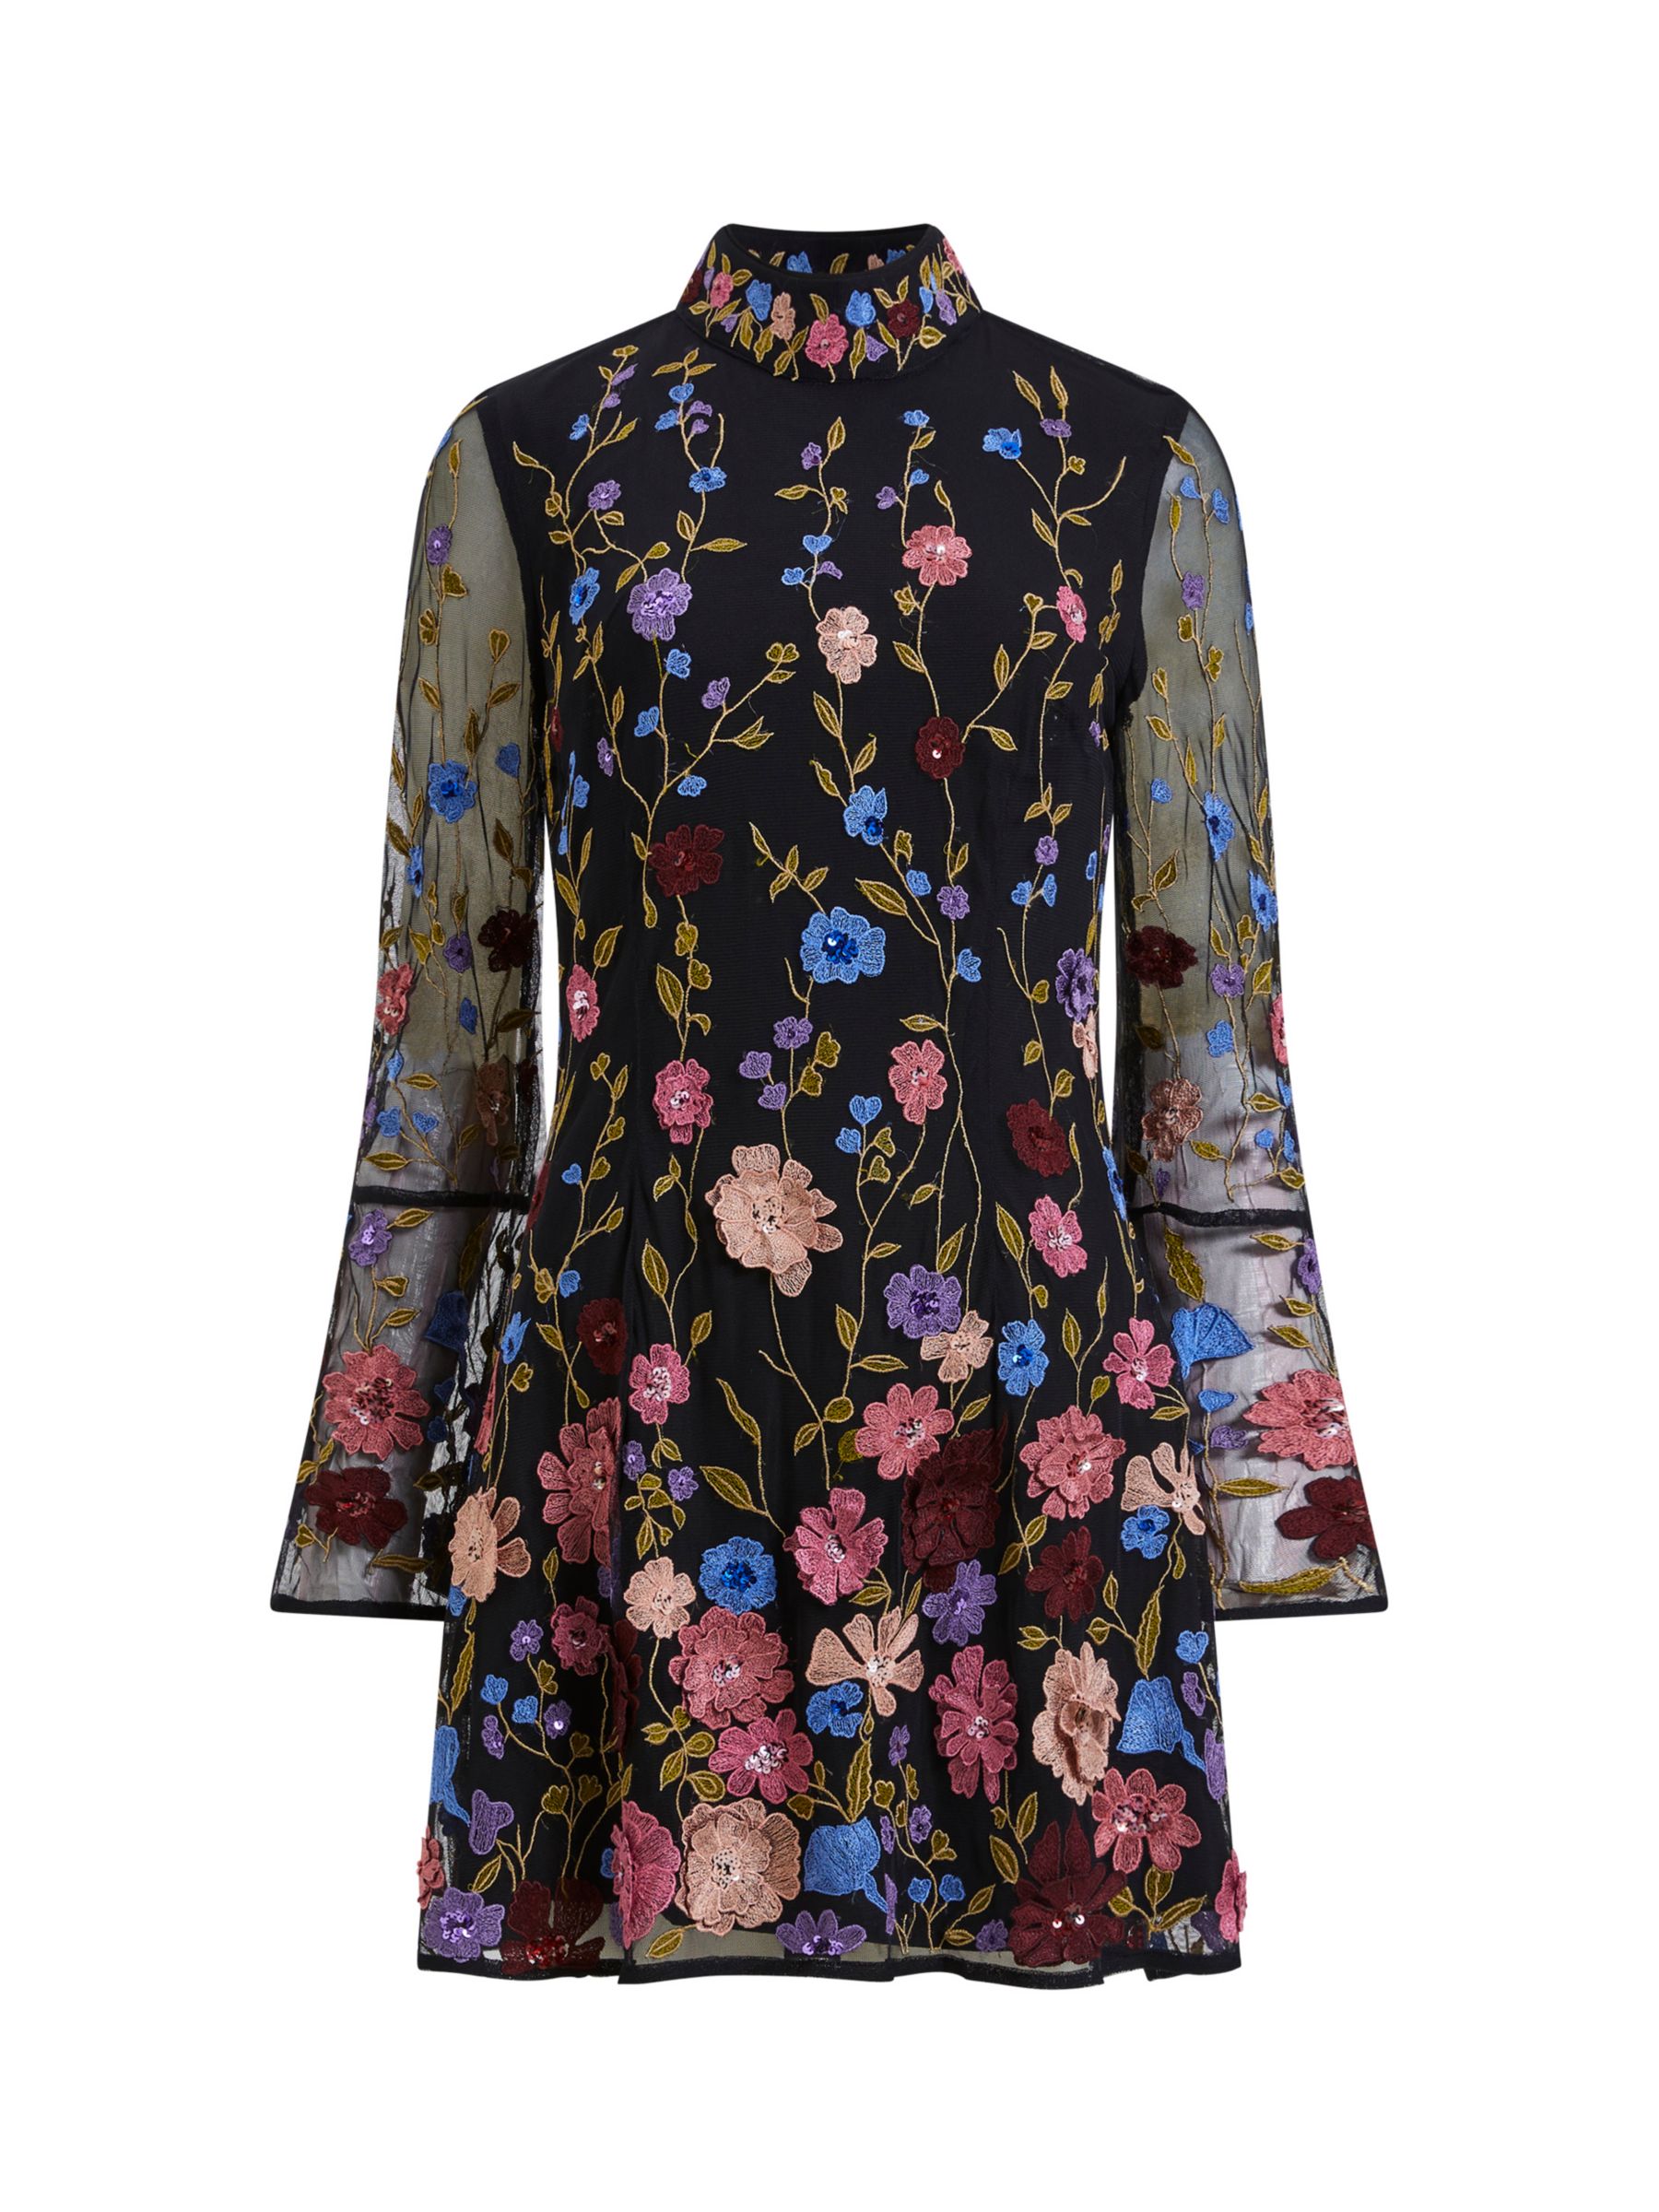 French Connection Astrida Floral Mini Dress, Black/Multi at John Lewis ...